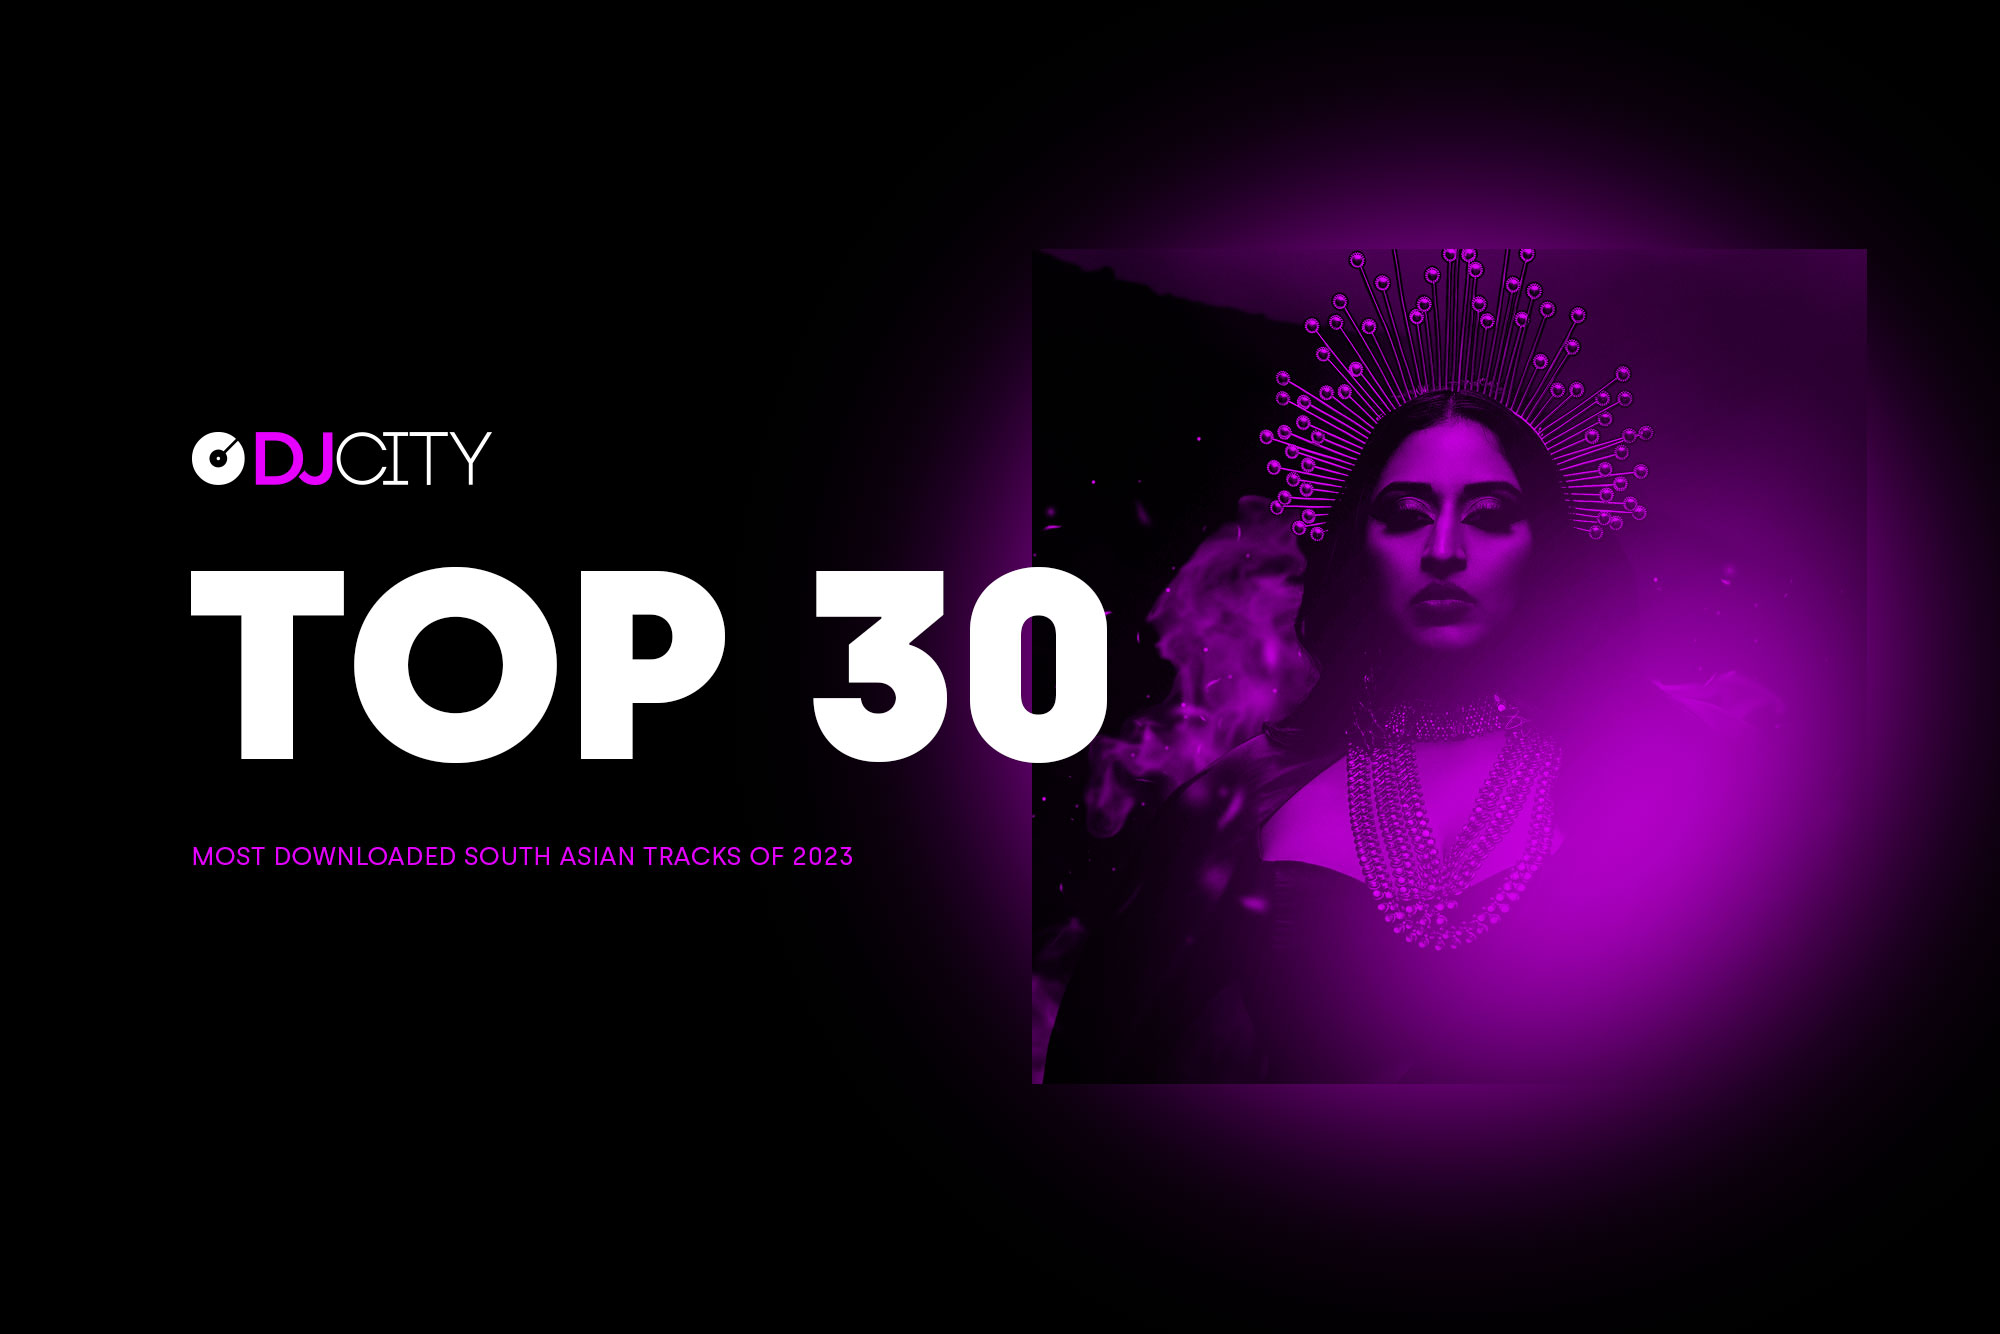 DJcity’s 30 Most Downloaded South Asian Tracks of 2023